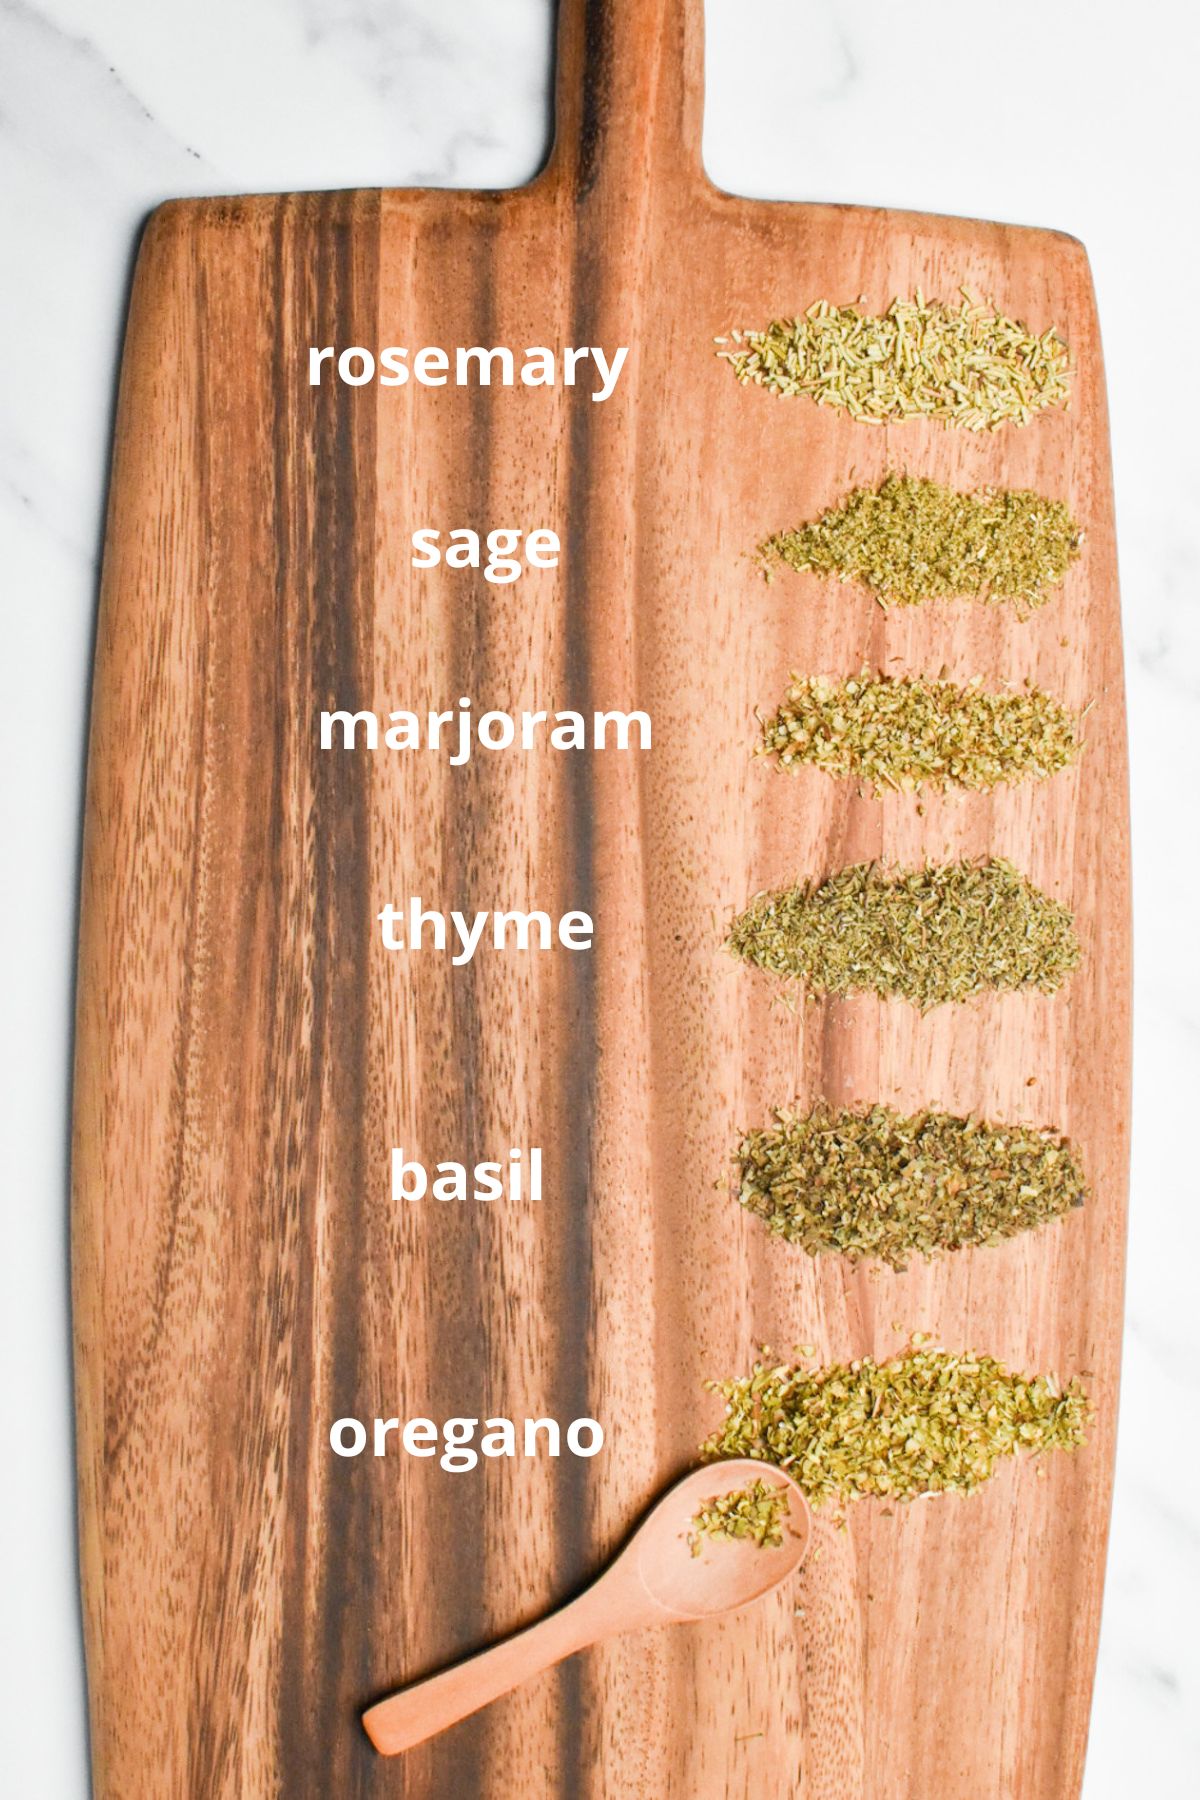 Dried herbs on a wooden board with white text next to them to label the rosemary, sage, marjoram, thyme, basil, and oregano.